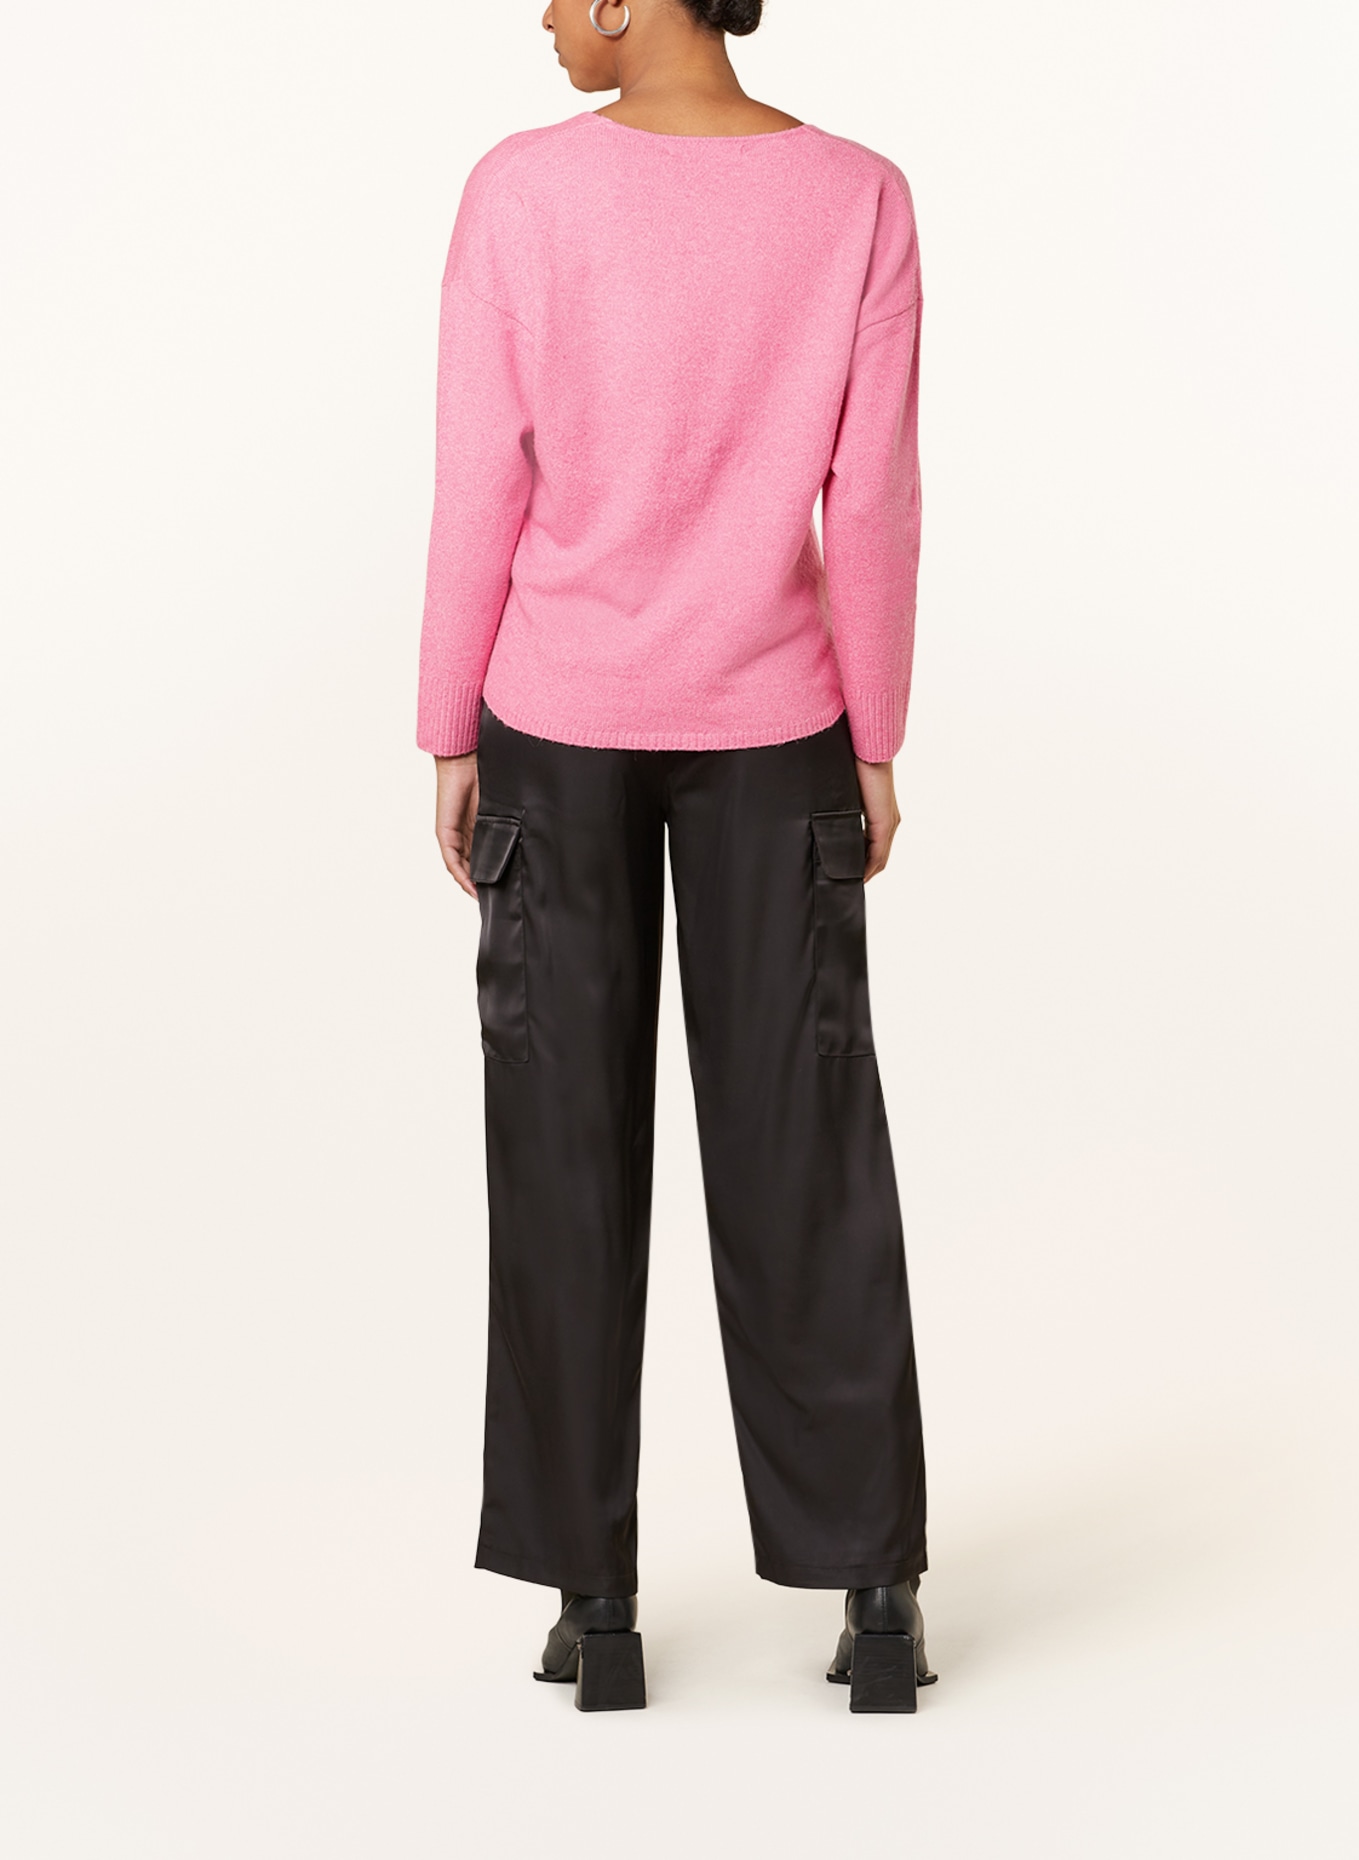 ONLY Pullover, Farbe: PINK (Bild 3)